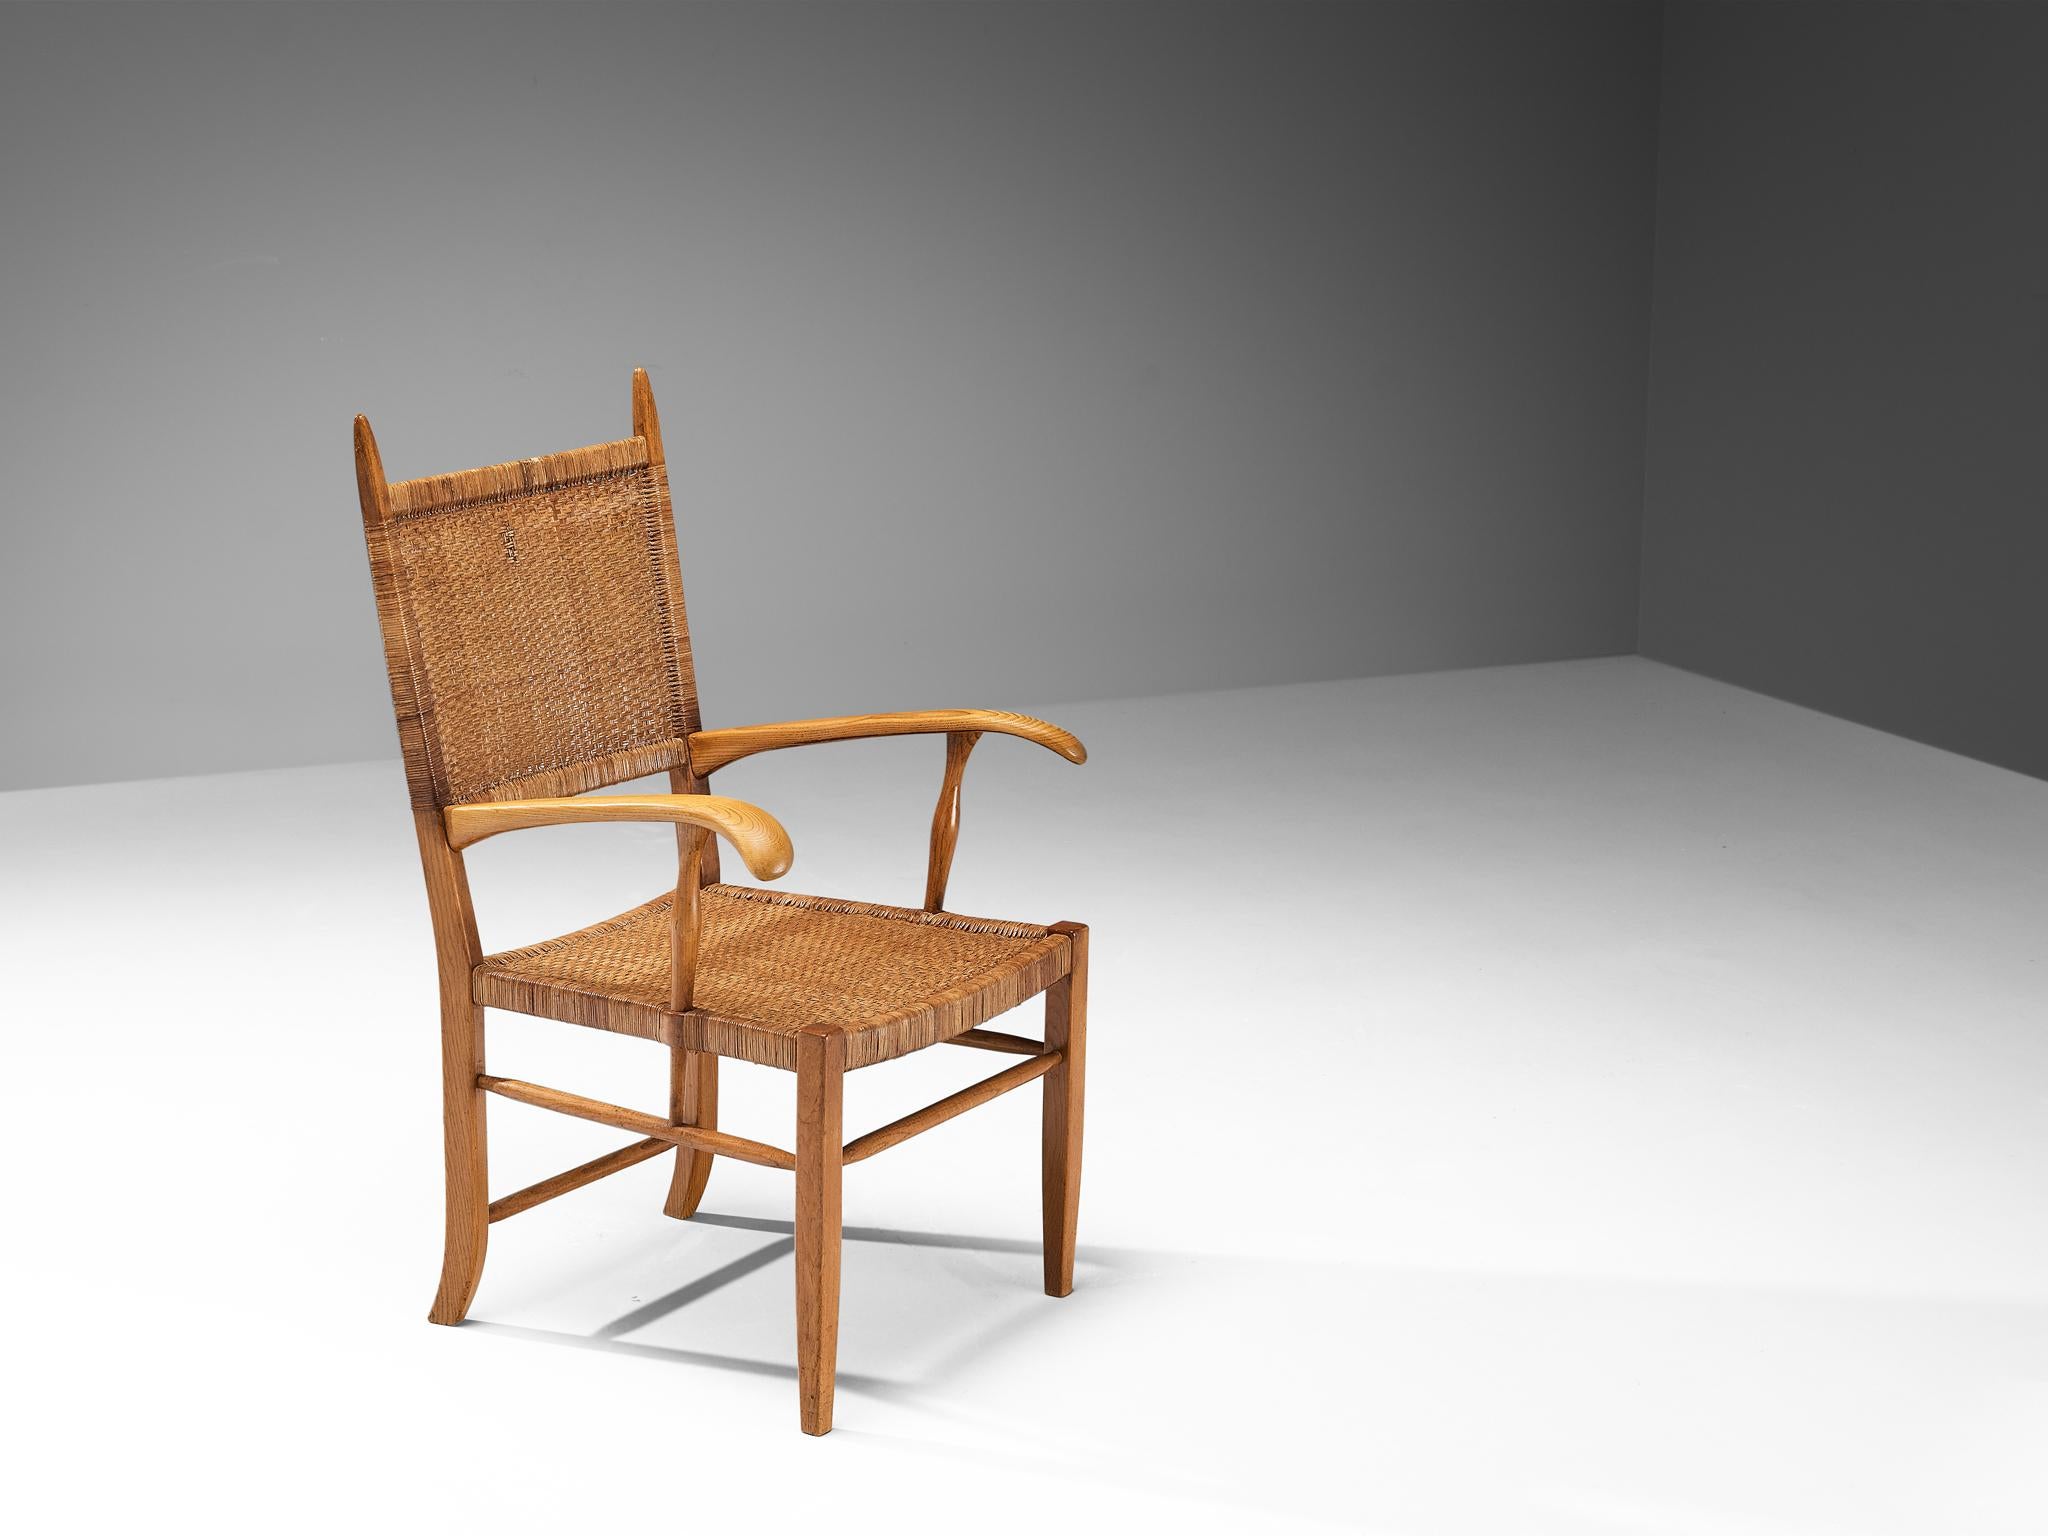 Armchair, ash, cane, The Netherlands, 1950s.

This elegant armchair features a warm ash wooden frame. Especially the stately high backrest makes this piece of furniture very remarkable. The backrest is furnished with woven cane, and blends nicely